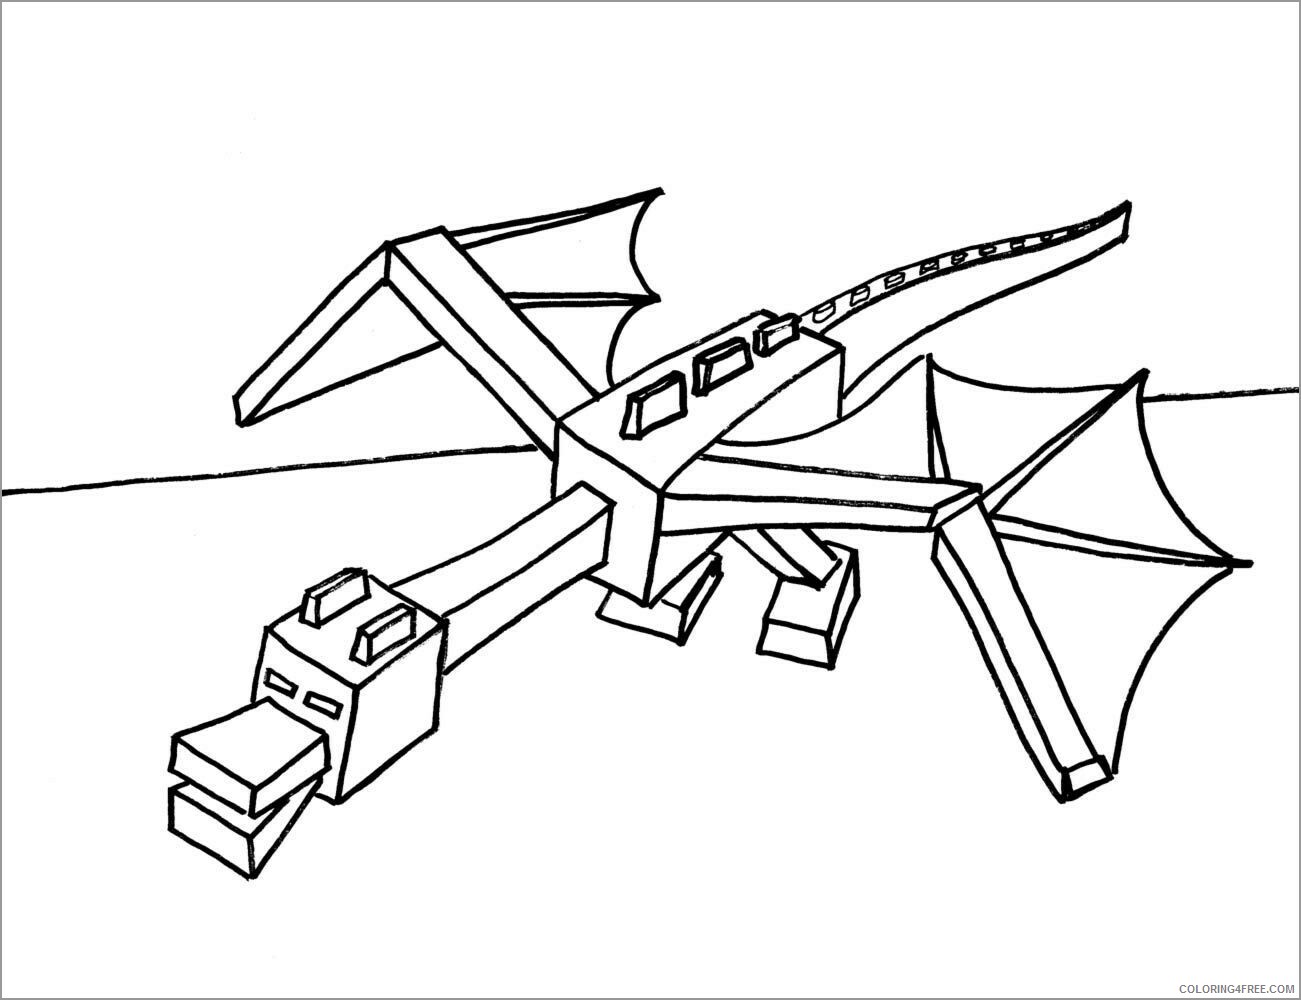 Minecraft Coloring Pages Games minecraft ender dragon Printable 2021 0479 Coloring4free